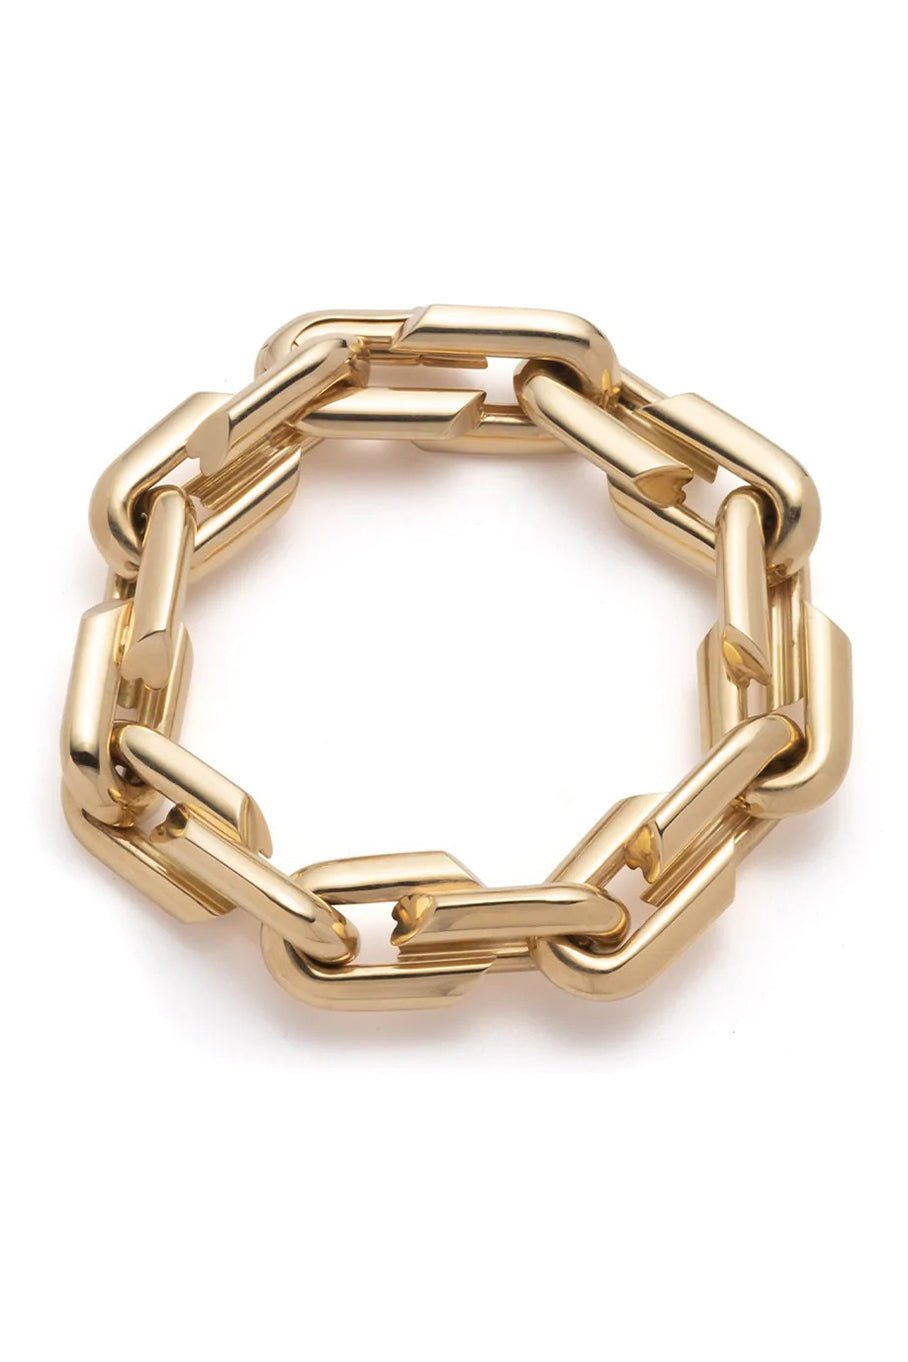 FOUNDRAE-Oversized Strong Hearts Love Link Bracelet-YELLOW GOLD